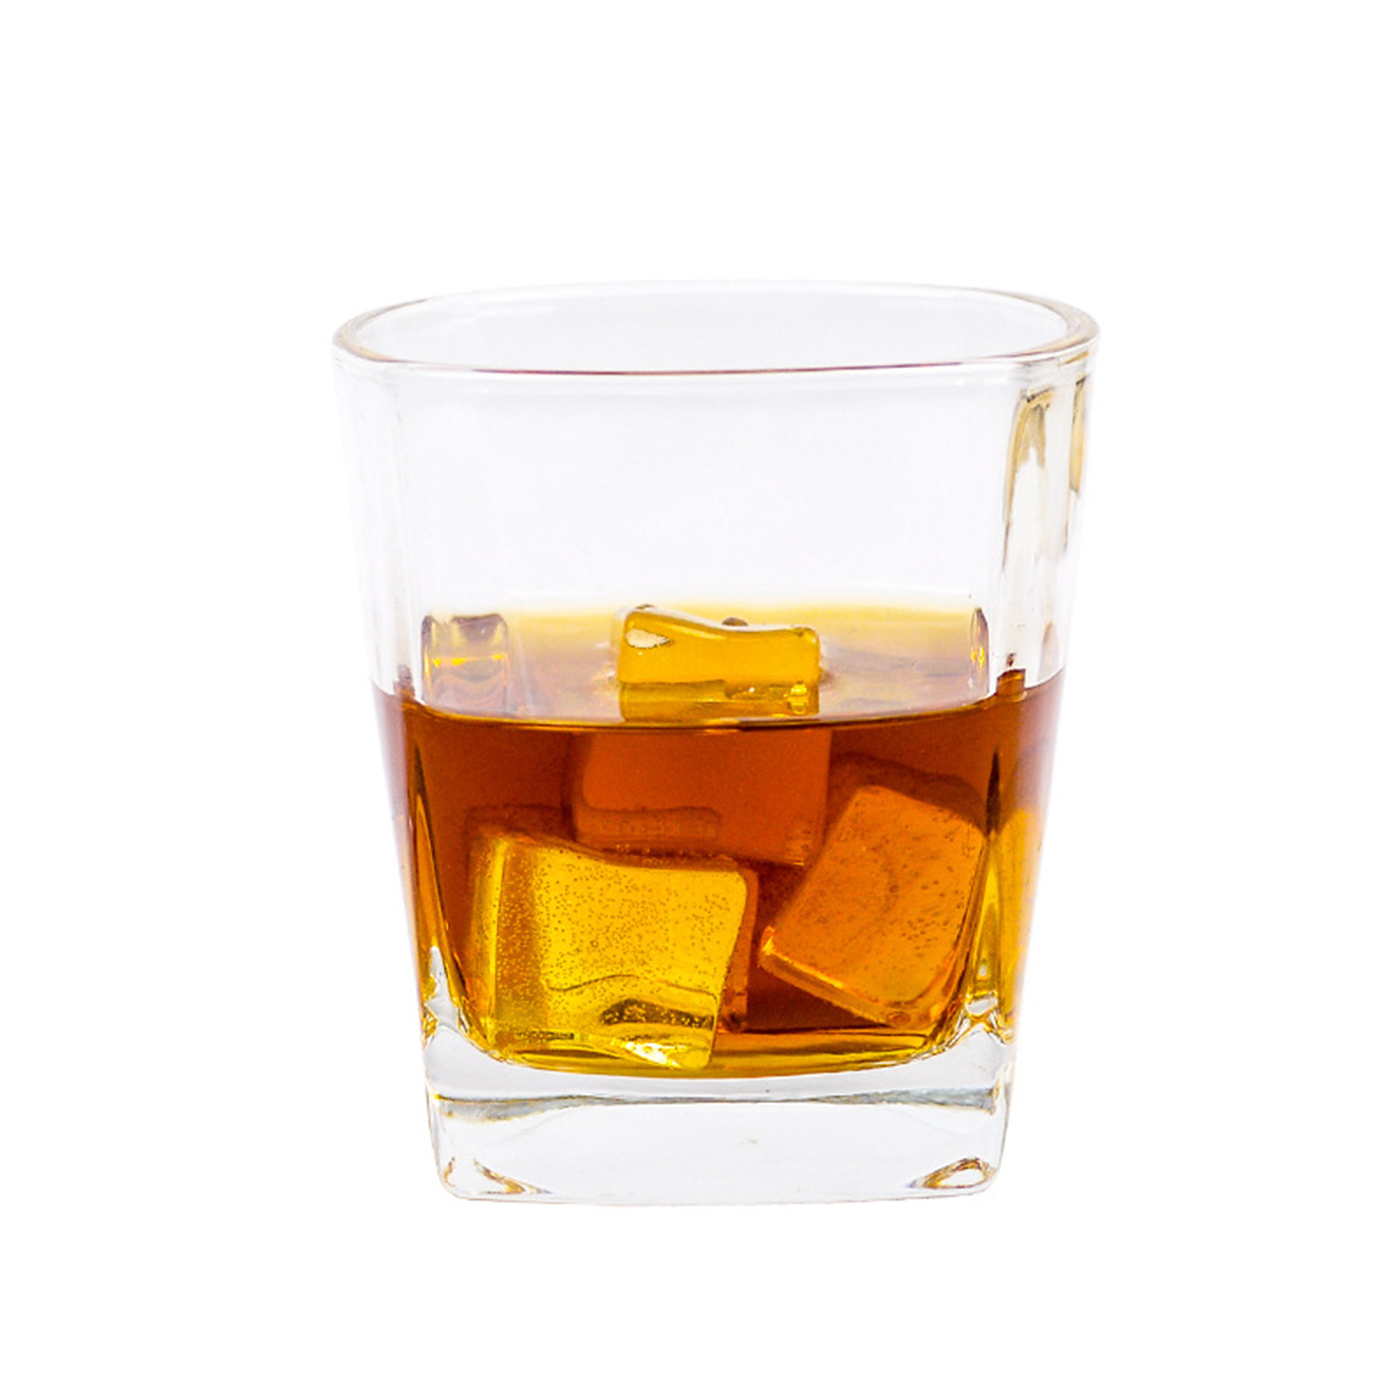 6 oz. Promotional Square Whiskey Glass2